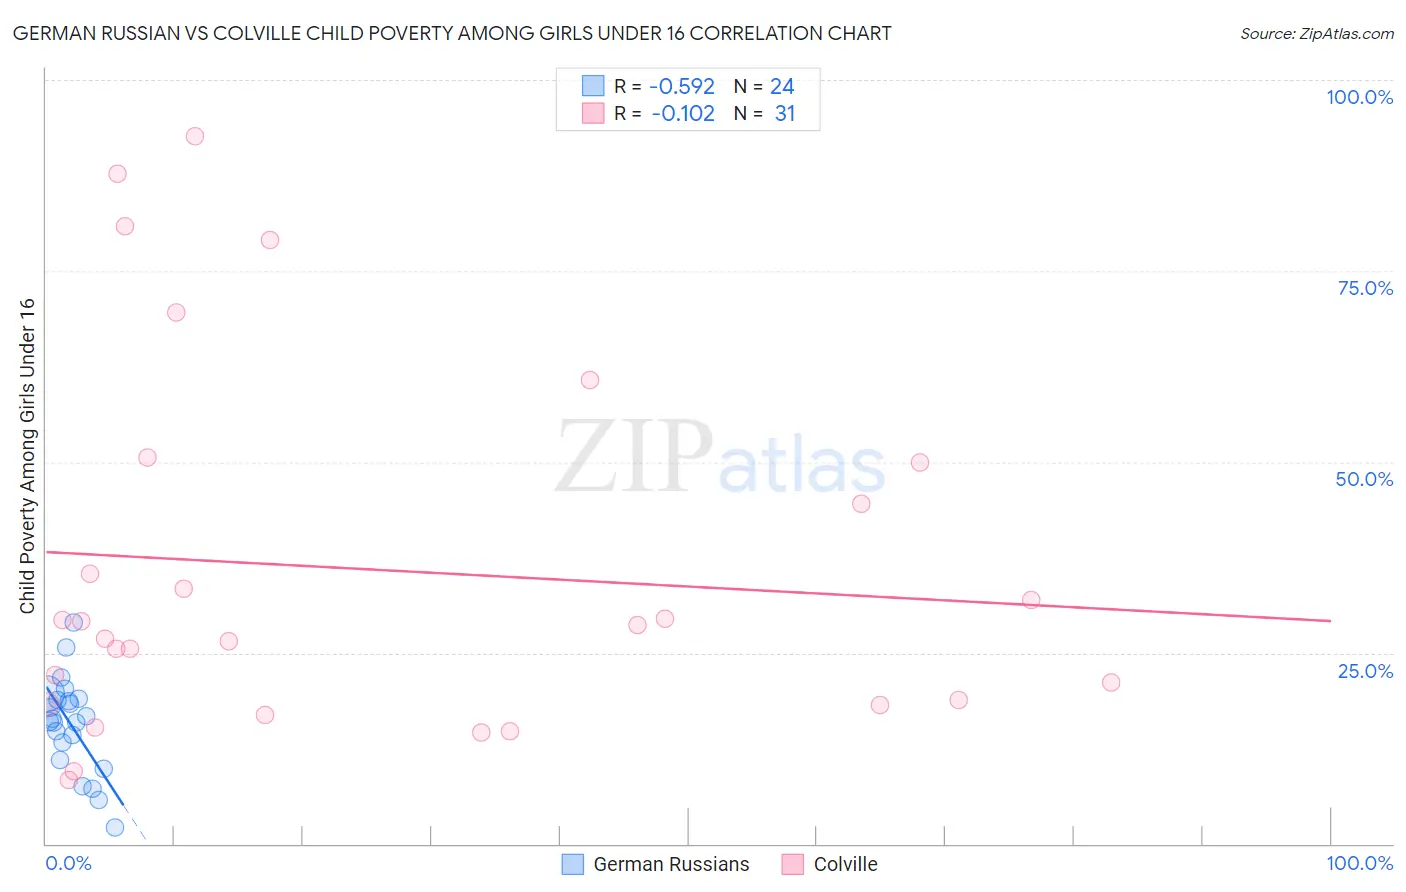 German Russian vs Colville Child Poverty Among Girls Under 16